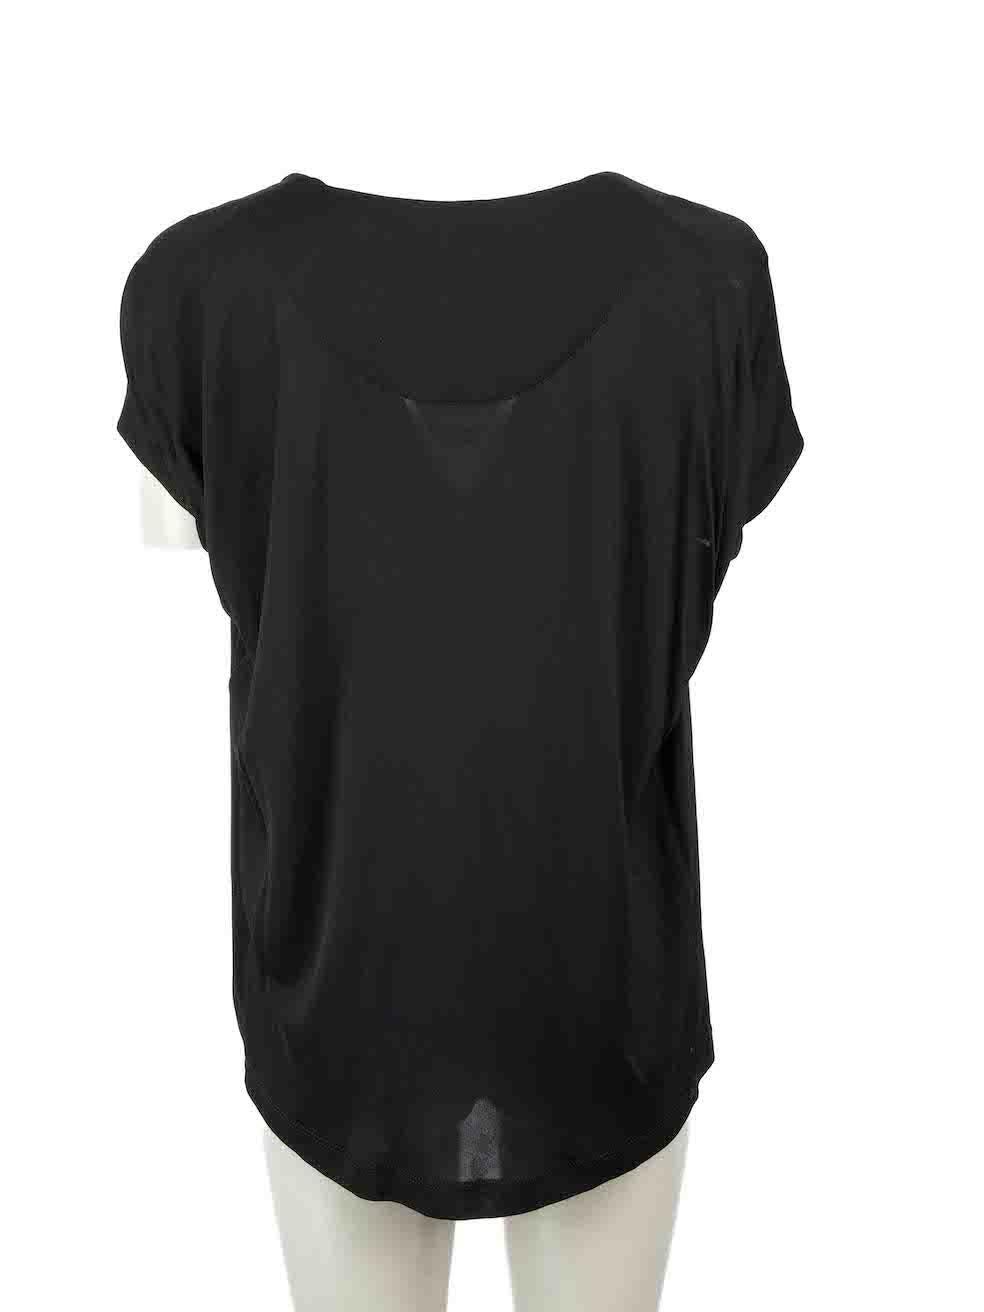 Louis Vuitton Black Ribbon Ruched Shoulder Top Size M In Excellent Condition For Sale In London, GB